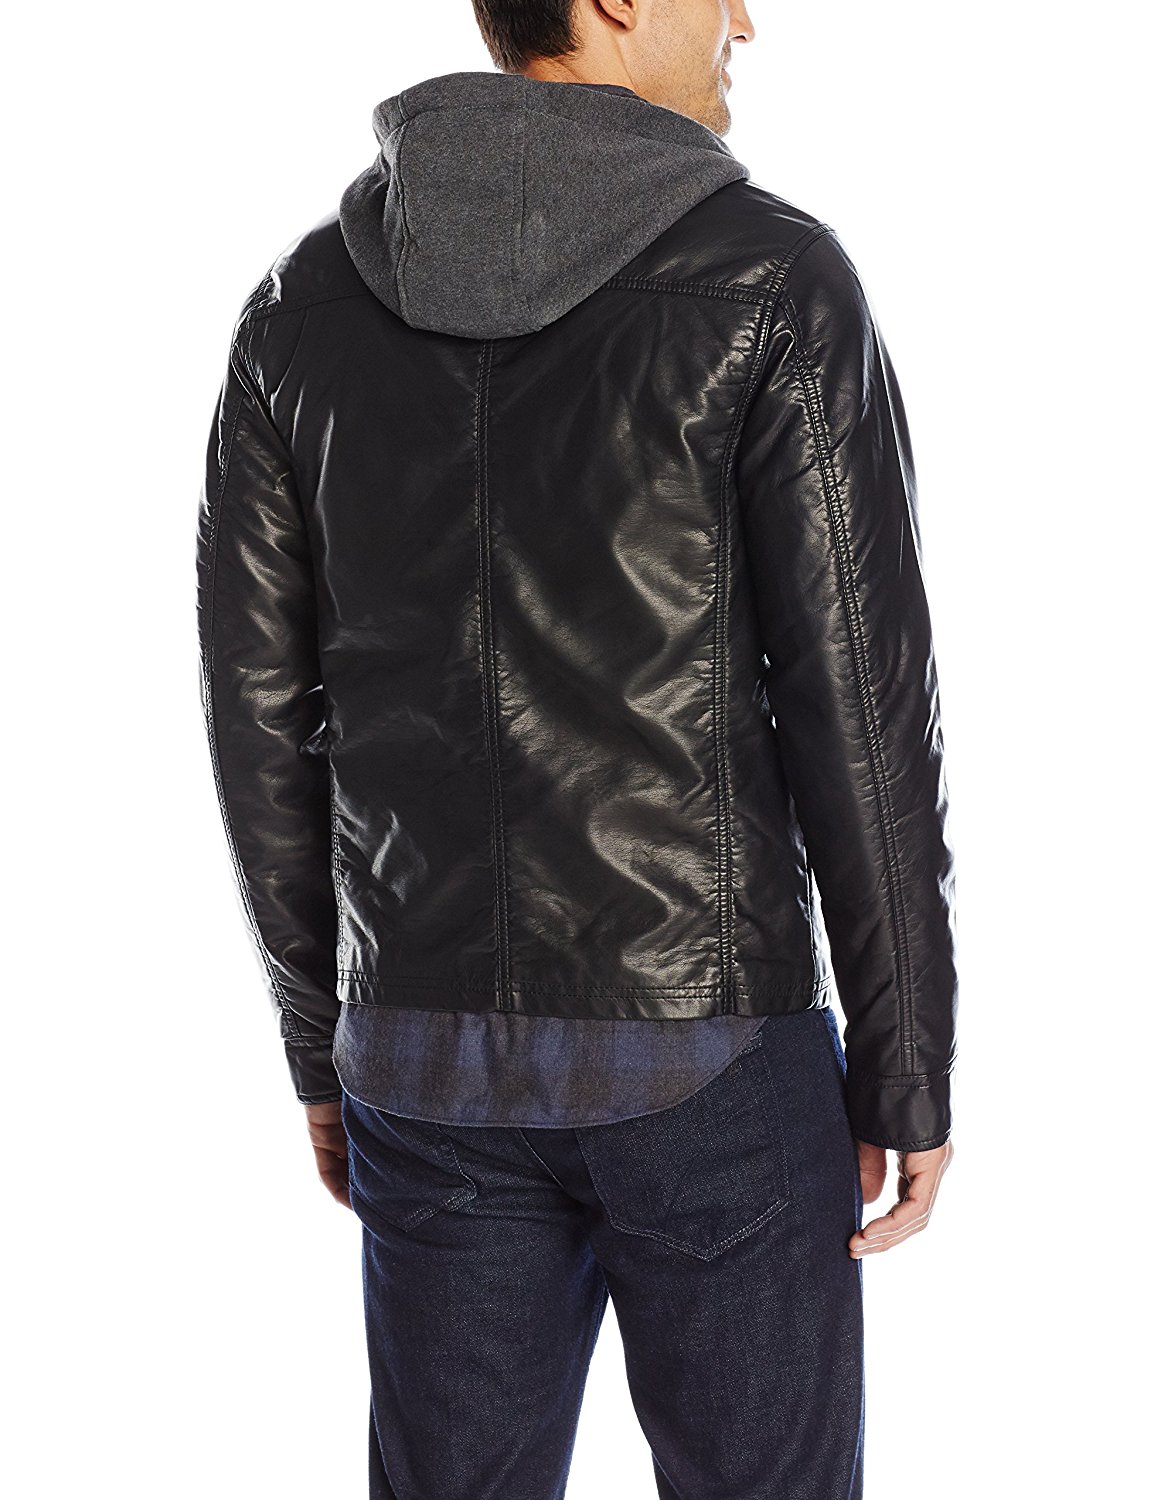 Men's Faux Leather Bomber Jacket with Fleece Hood | americasuits.com